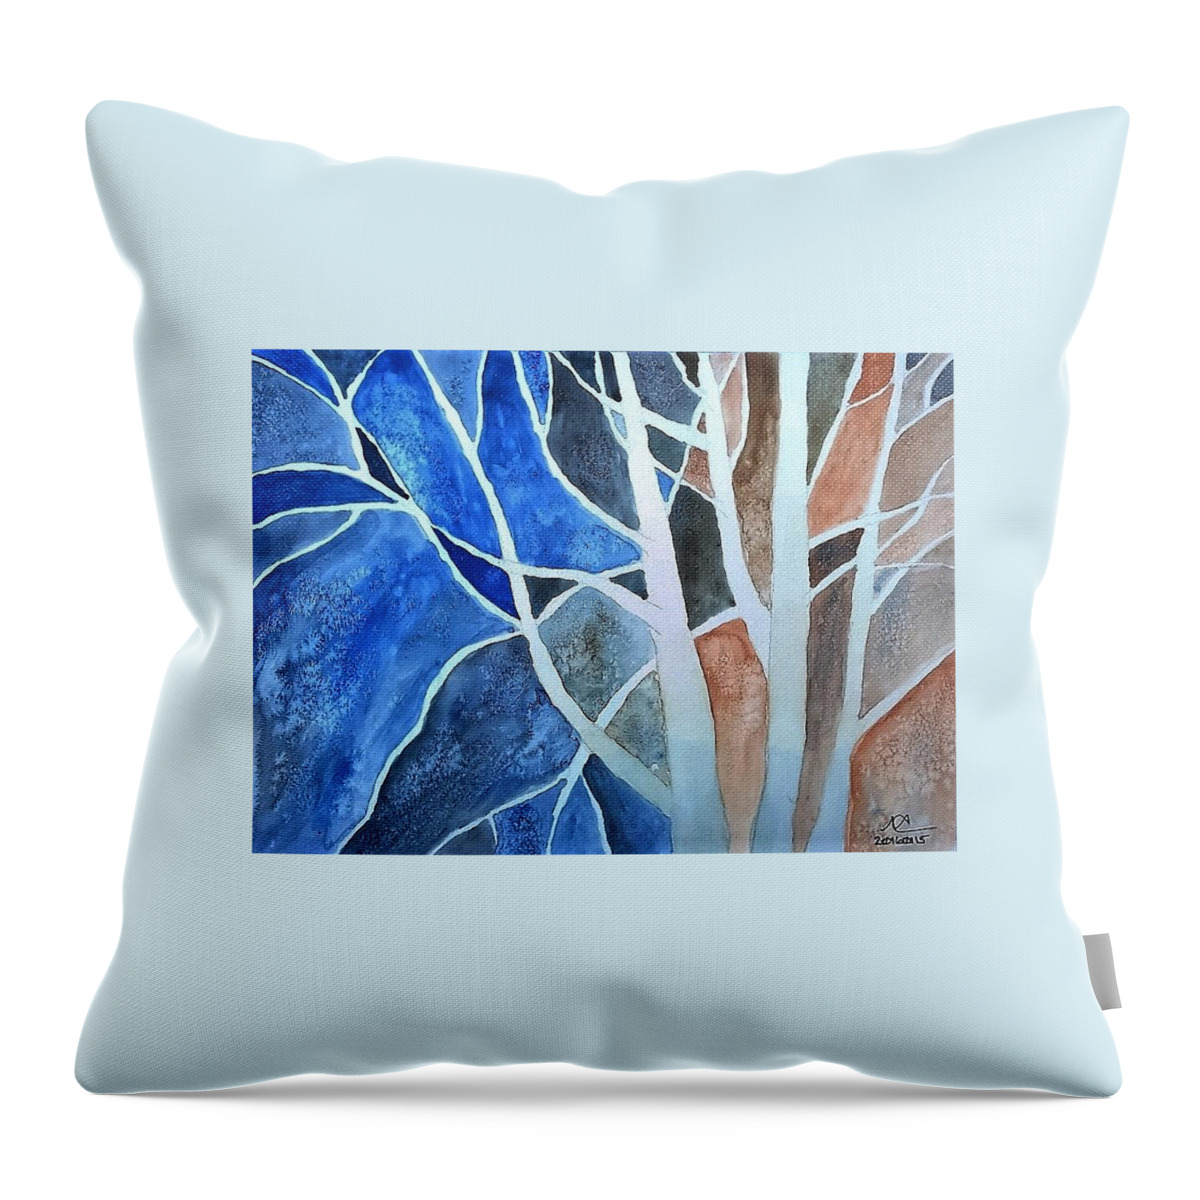 Crystalized Winter Throw Pillow featuring the painting Crystalized Winter by Mark C Jackson